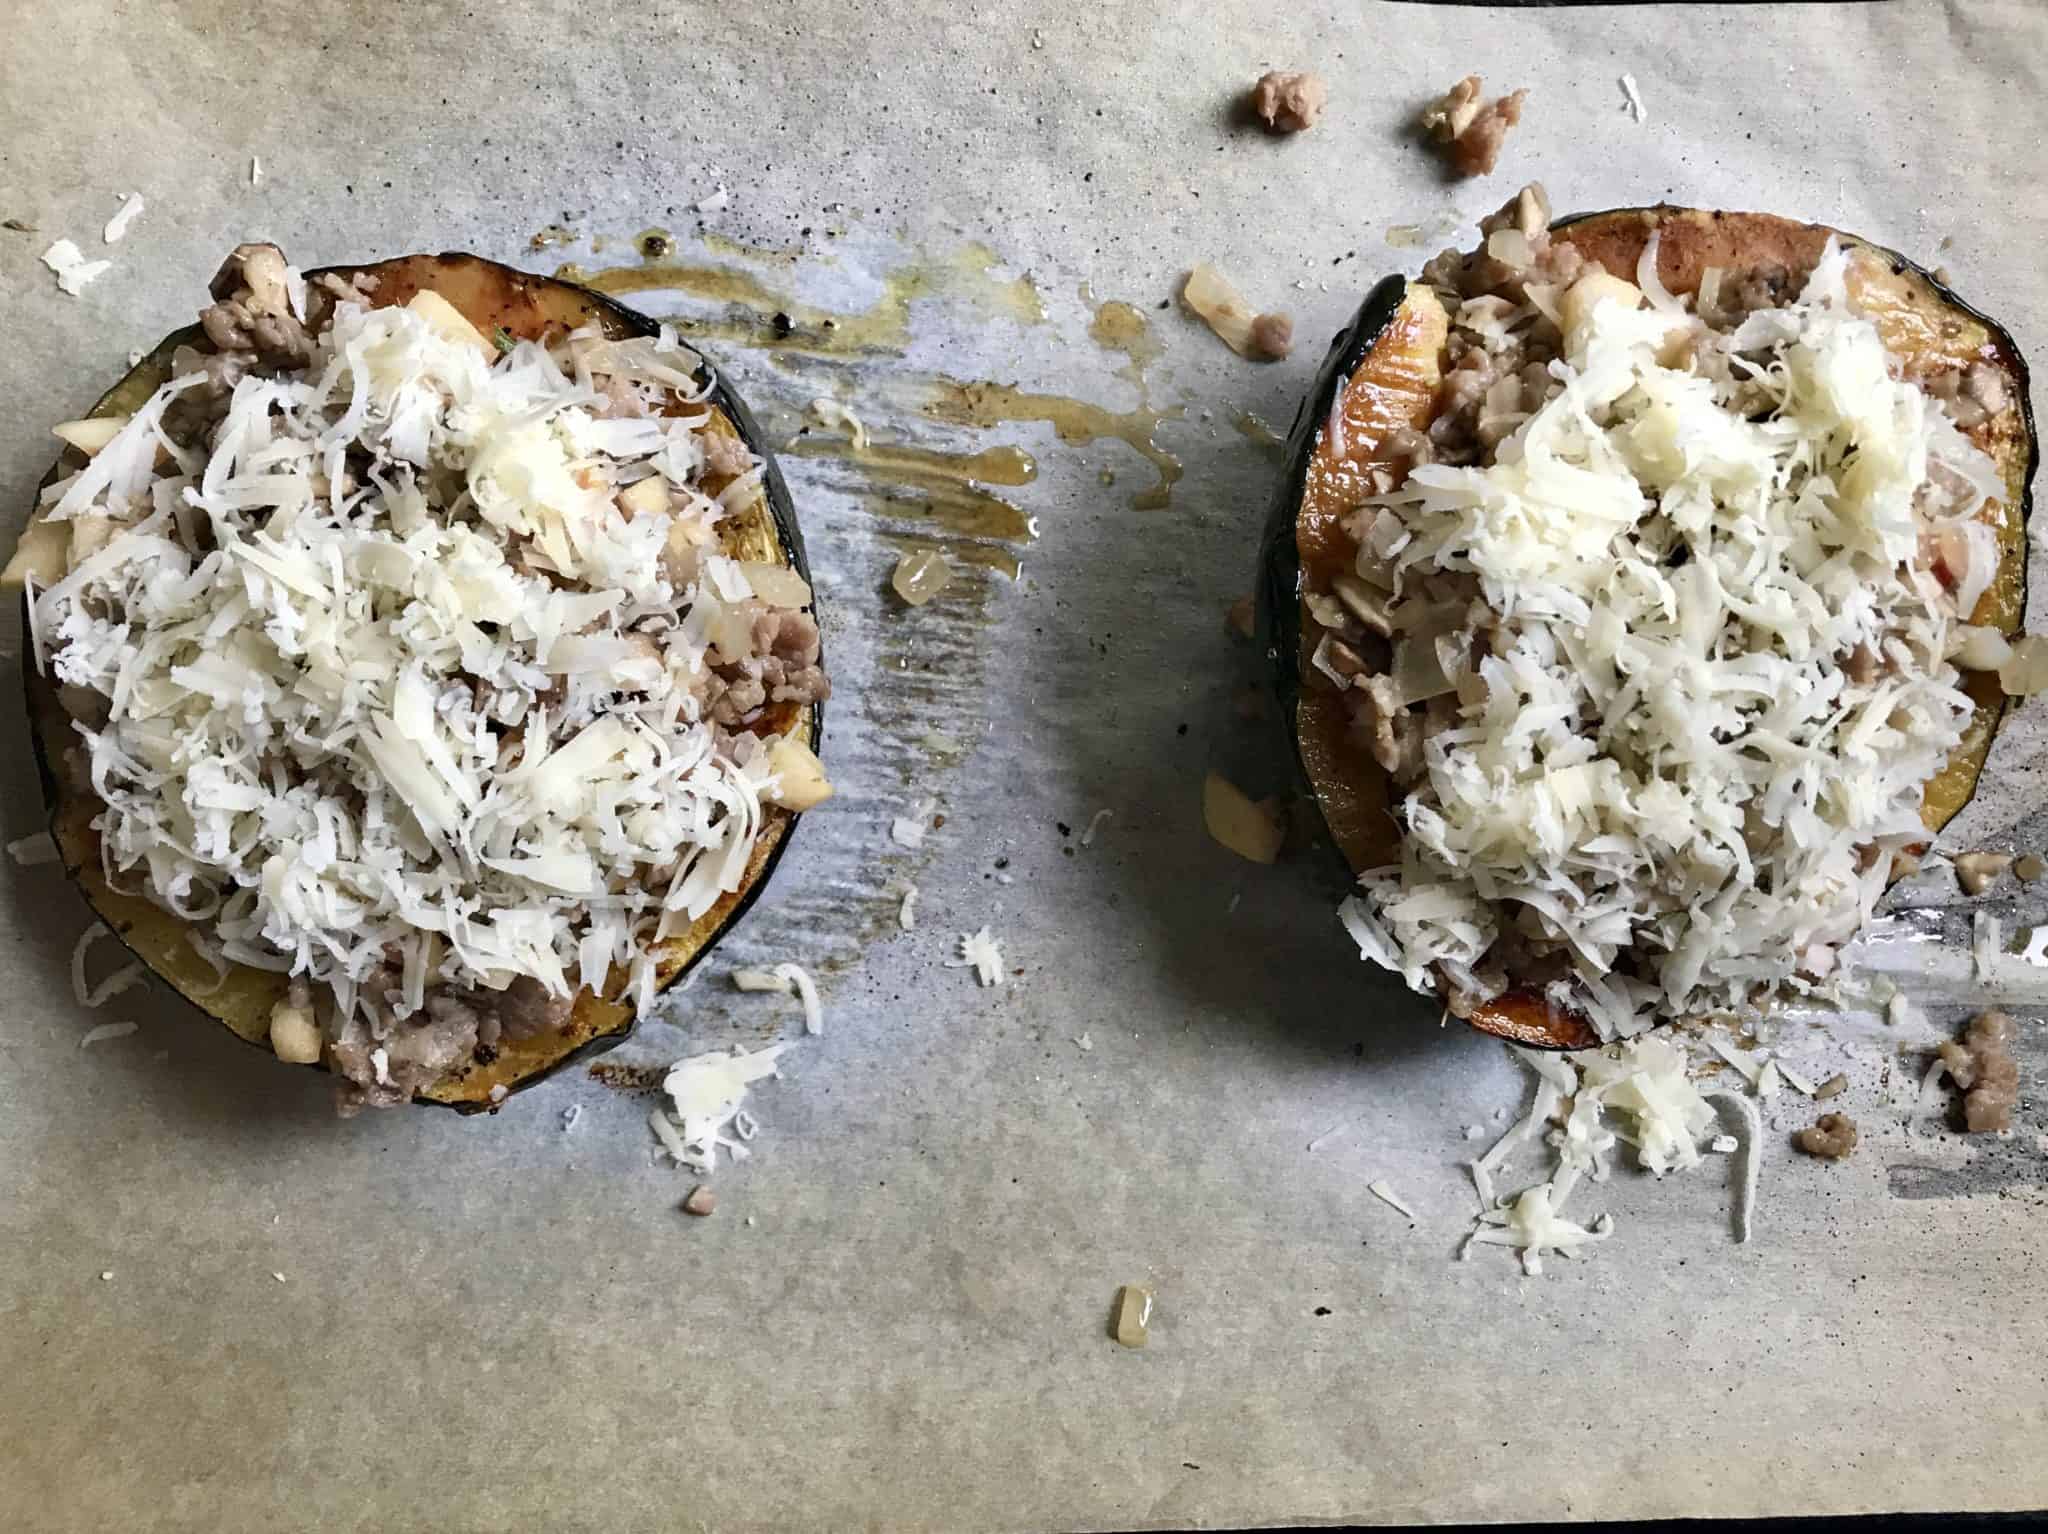 Acorn Squash stuffed and topped with shredded gruyére cheese